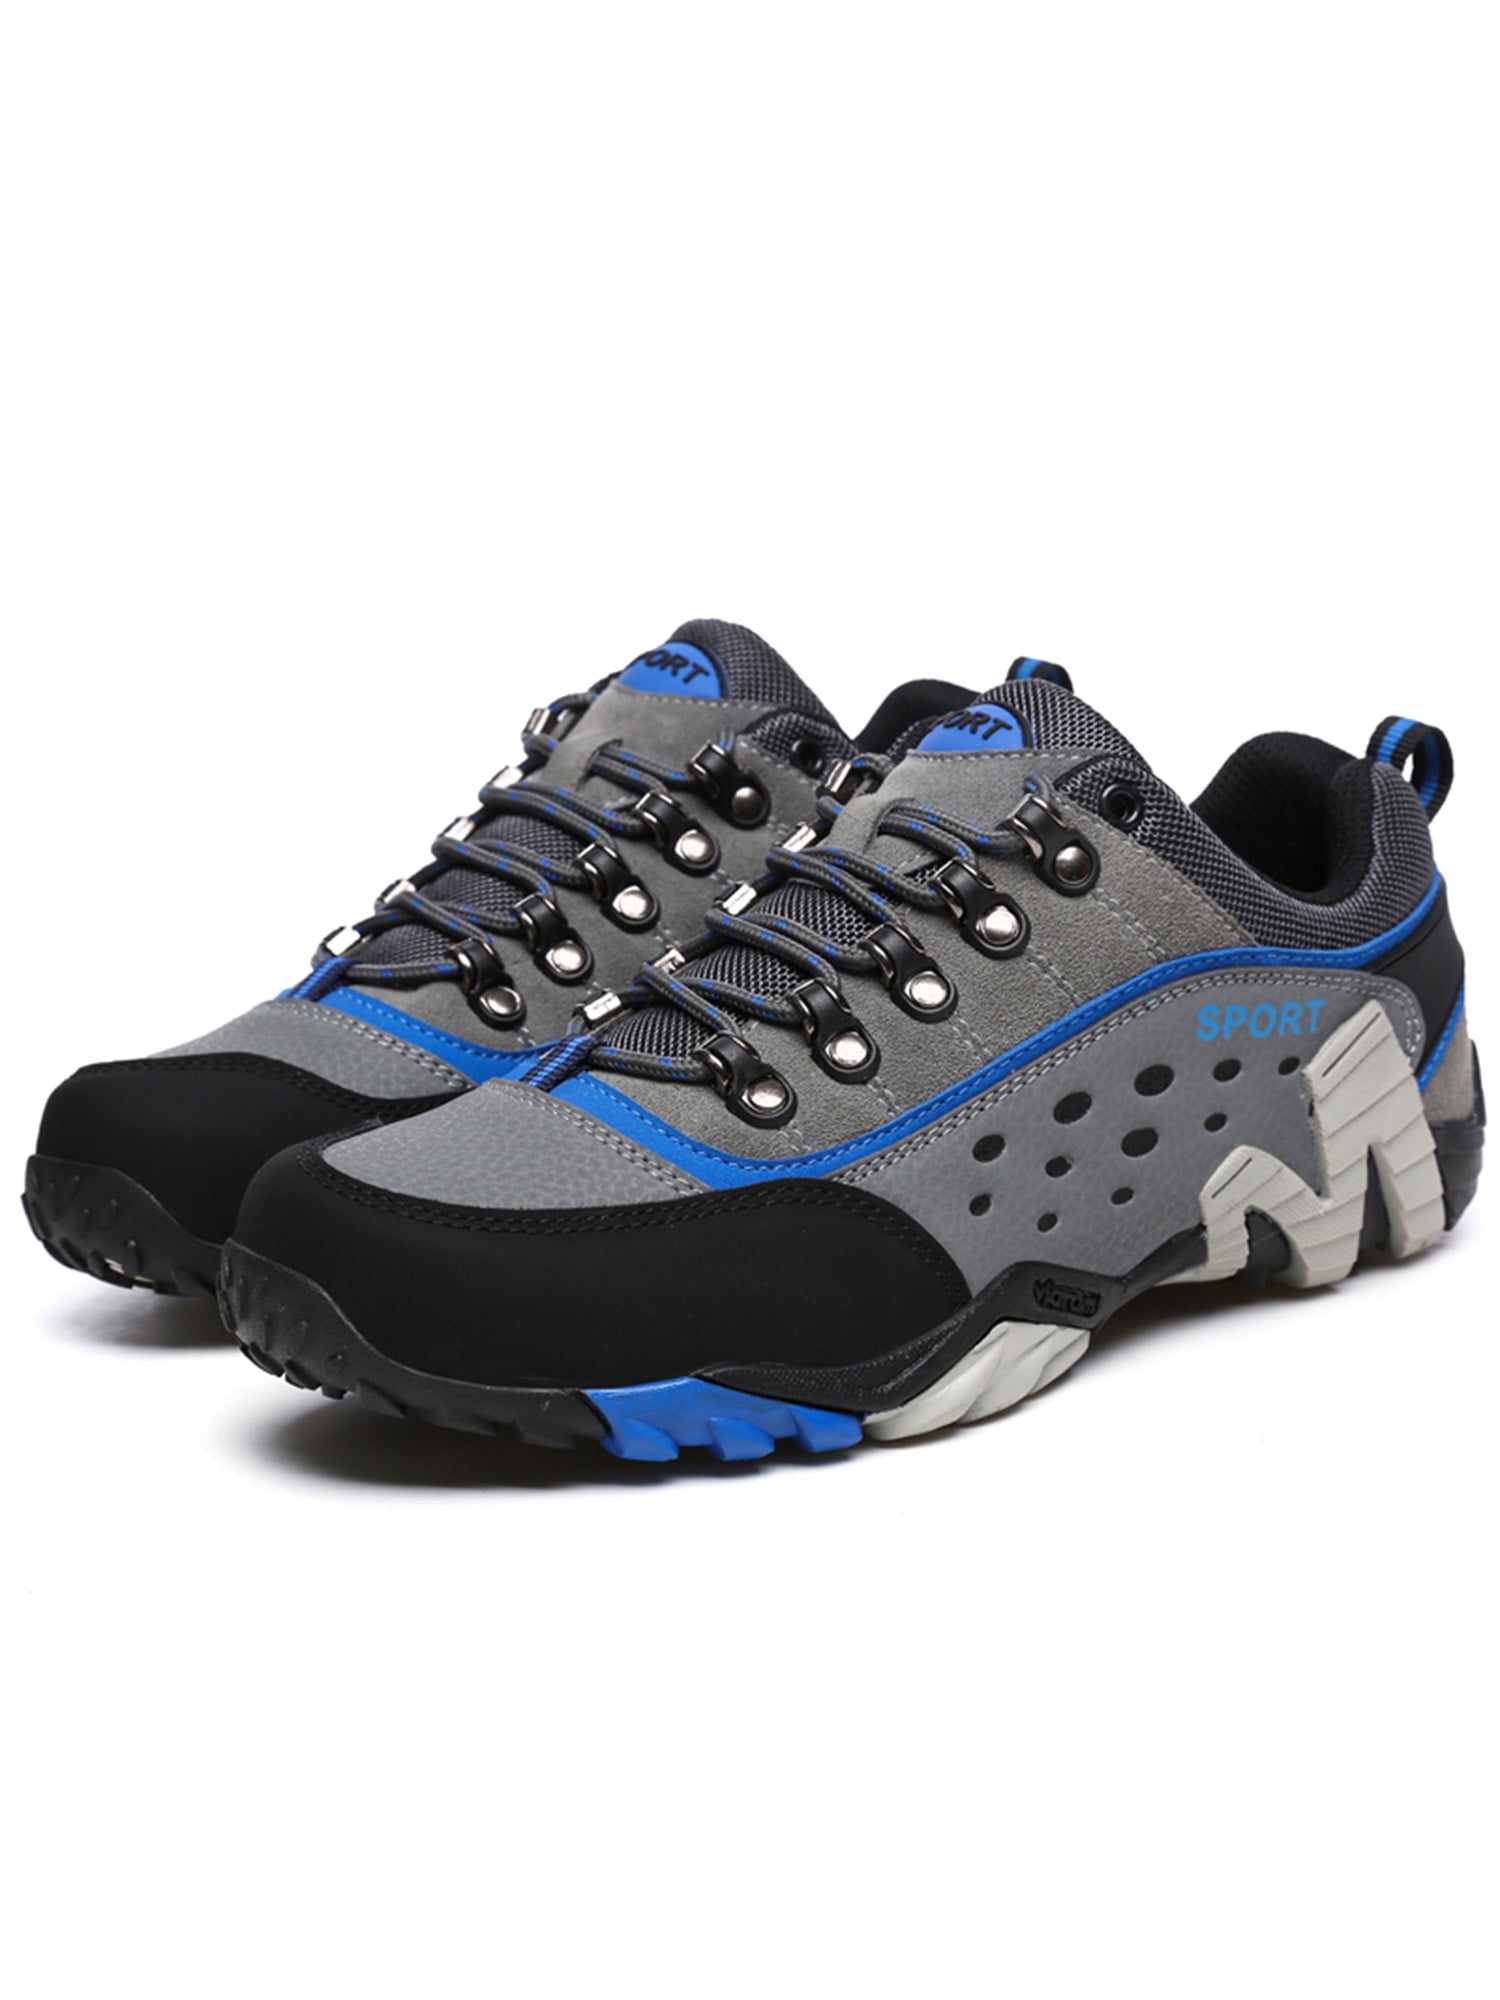 Hiking Shoes Mens mesh Sports Off-Road Outdoor shoes-Royalblue-41